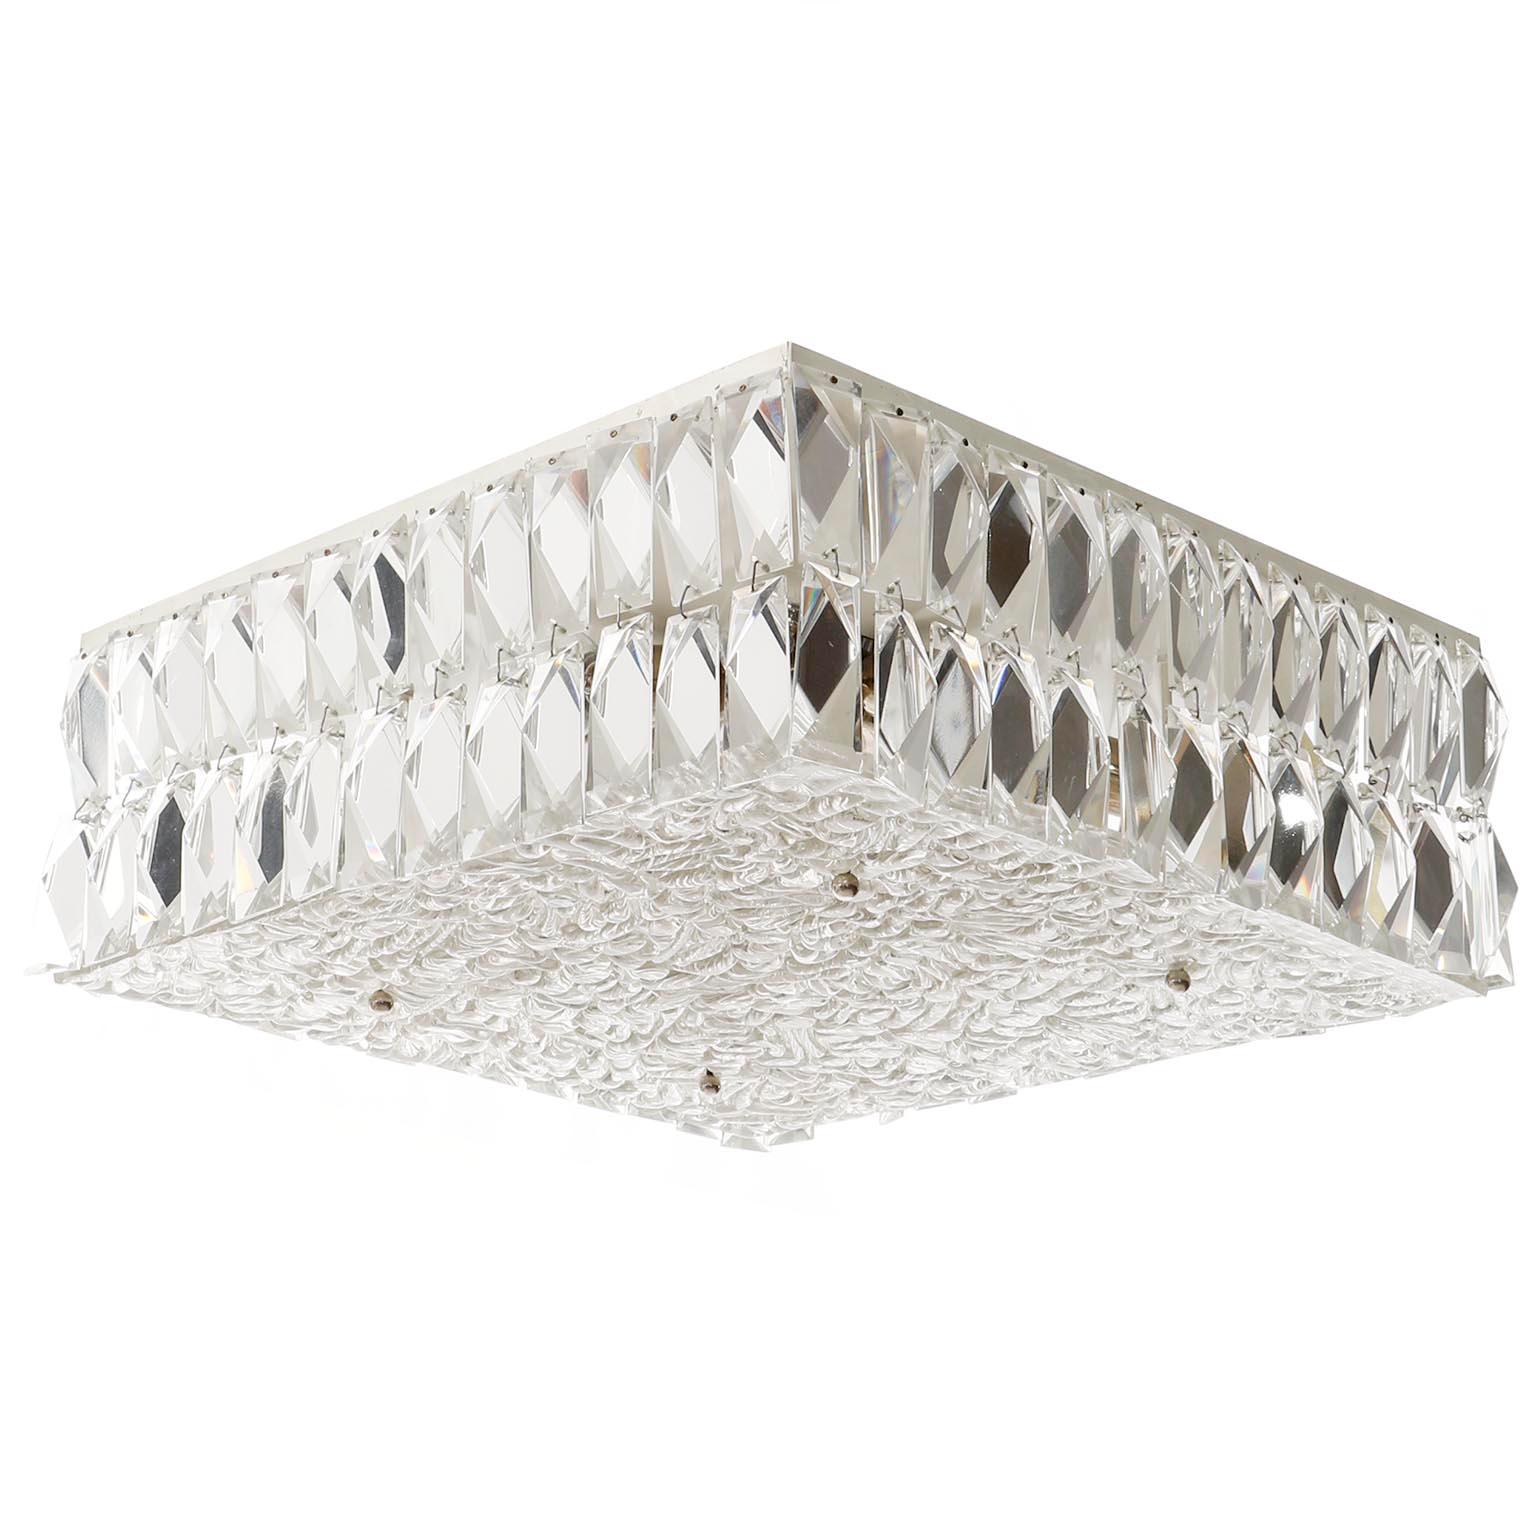 A square ceiling lamp by J.T. Kalmar, Vienna, Austria, manufactured in midcentury, circa 1960 (late 1950s or early 1960s).
The fixture is made of a square white painted metal frame which is decorated with two rows of faceted cut crystal glasses on